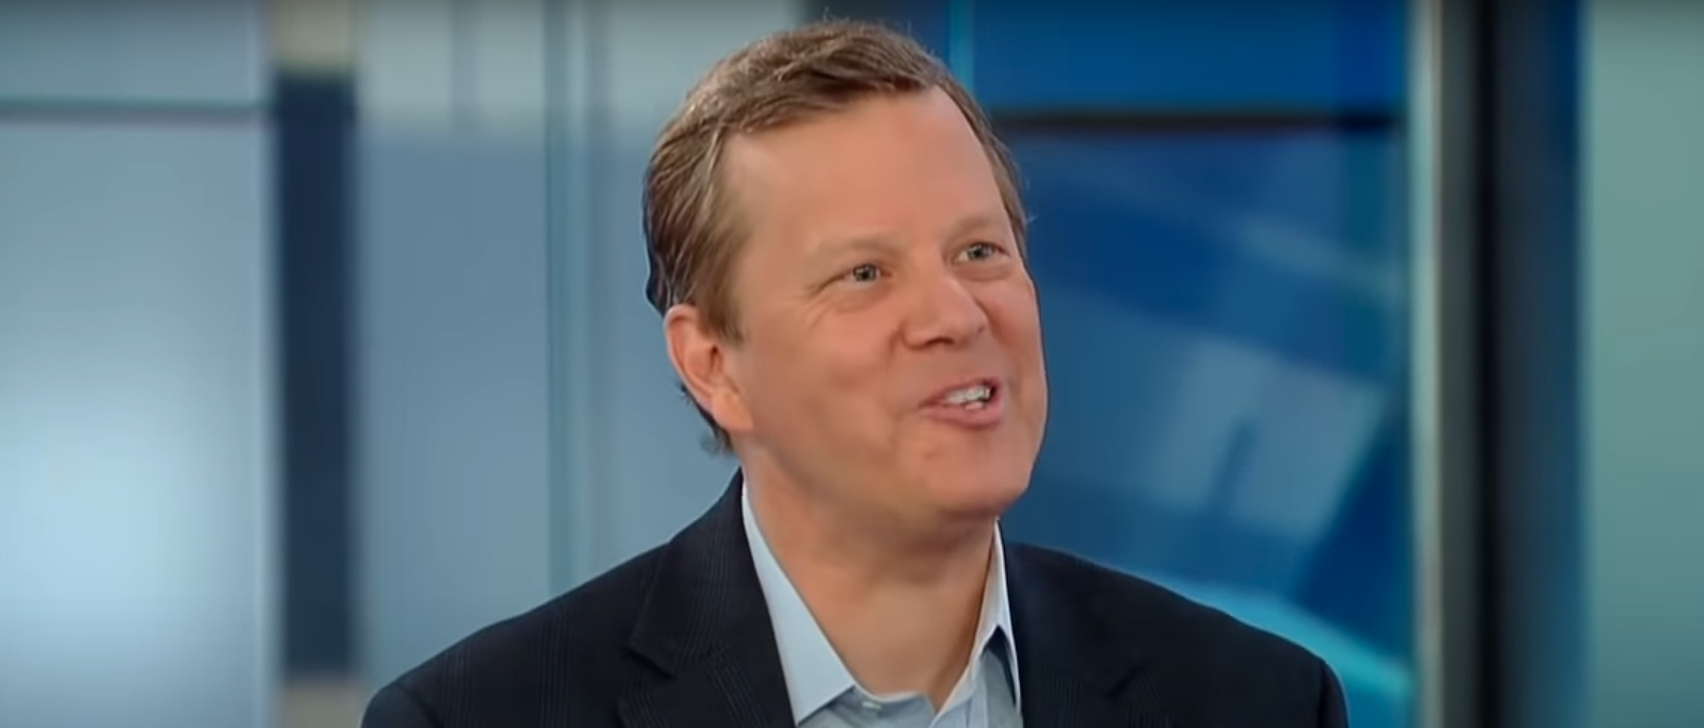 Peter Schweizer talked with Sean Hannity on the Fox News Channel about his book “Secret Empire” in March 2018. [YouTube/Screenshot/FoxNews]